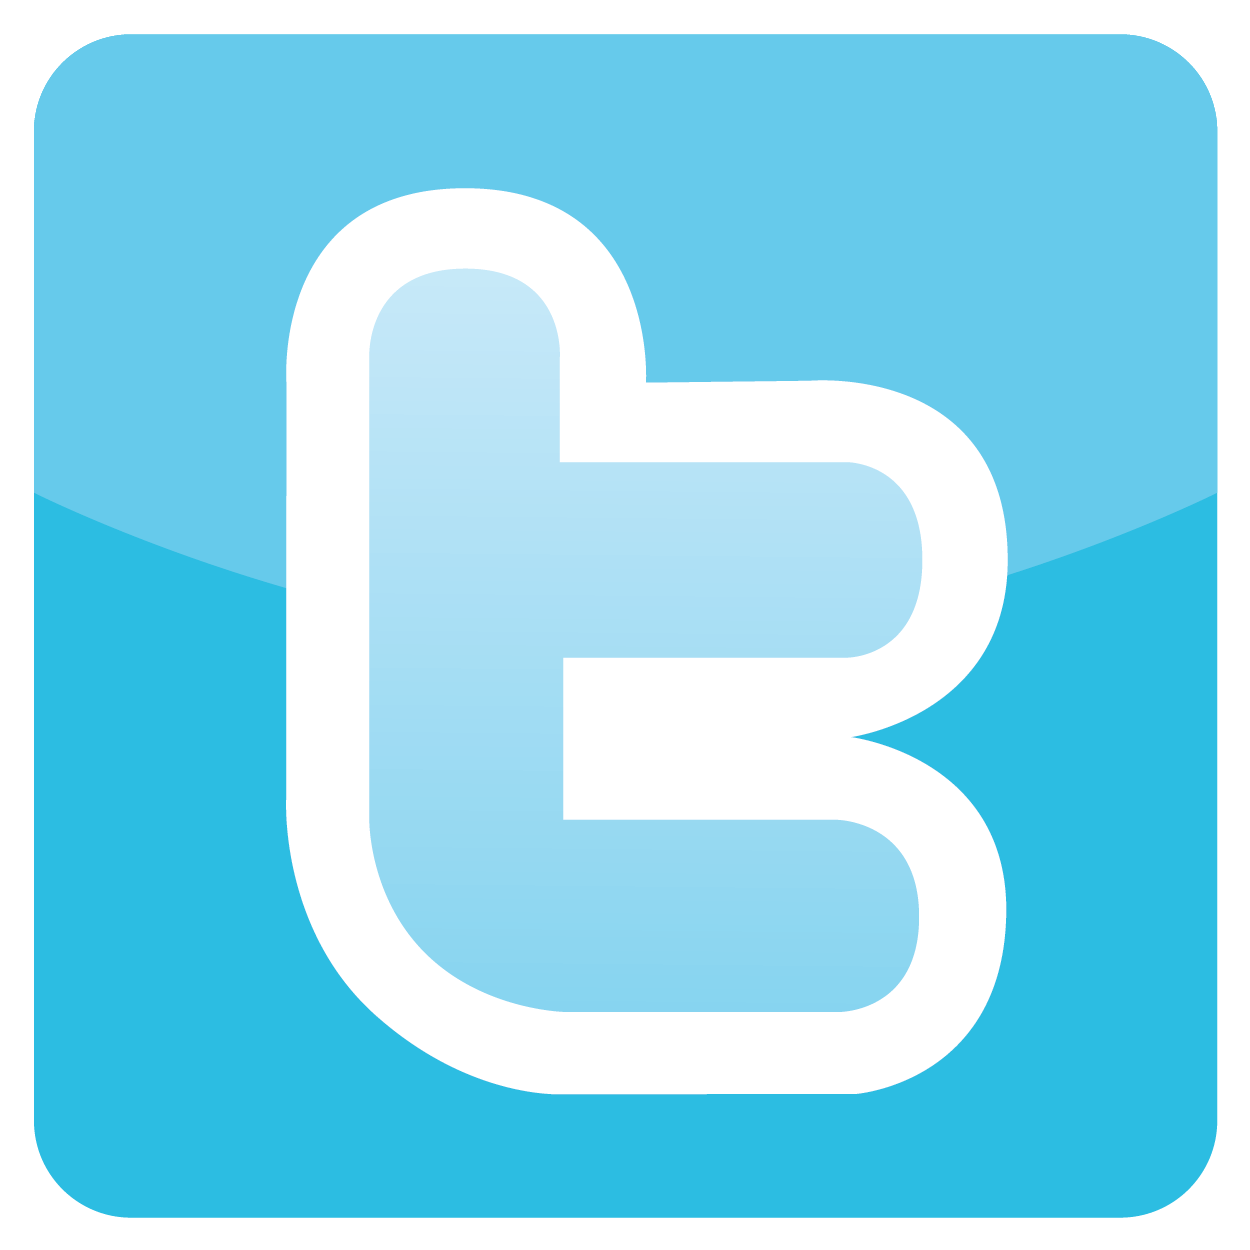 Twitter Png Logo Transparent Twitter Logopng Images Pluspng Images